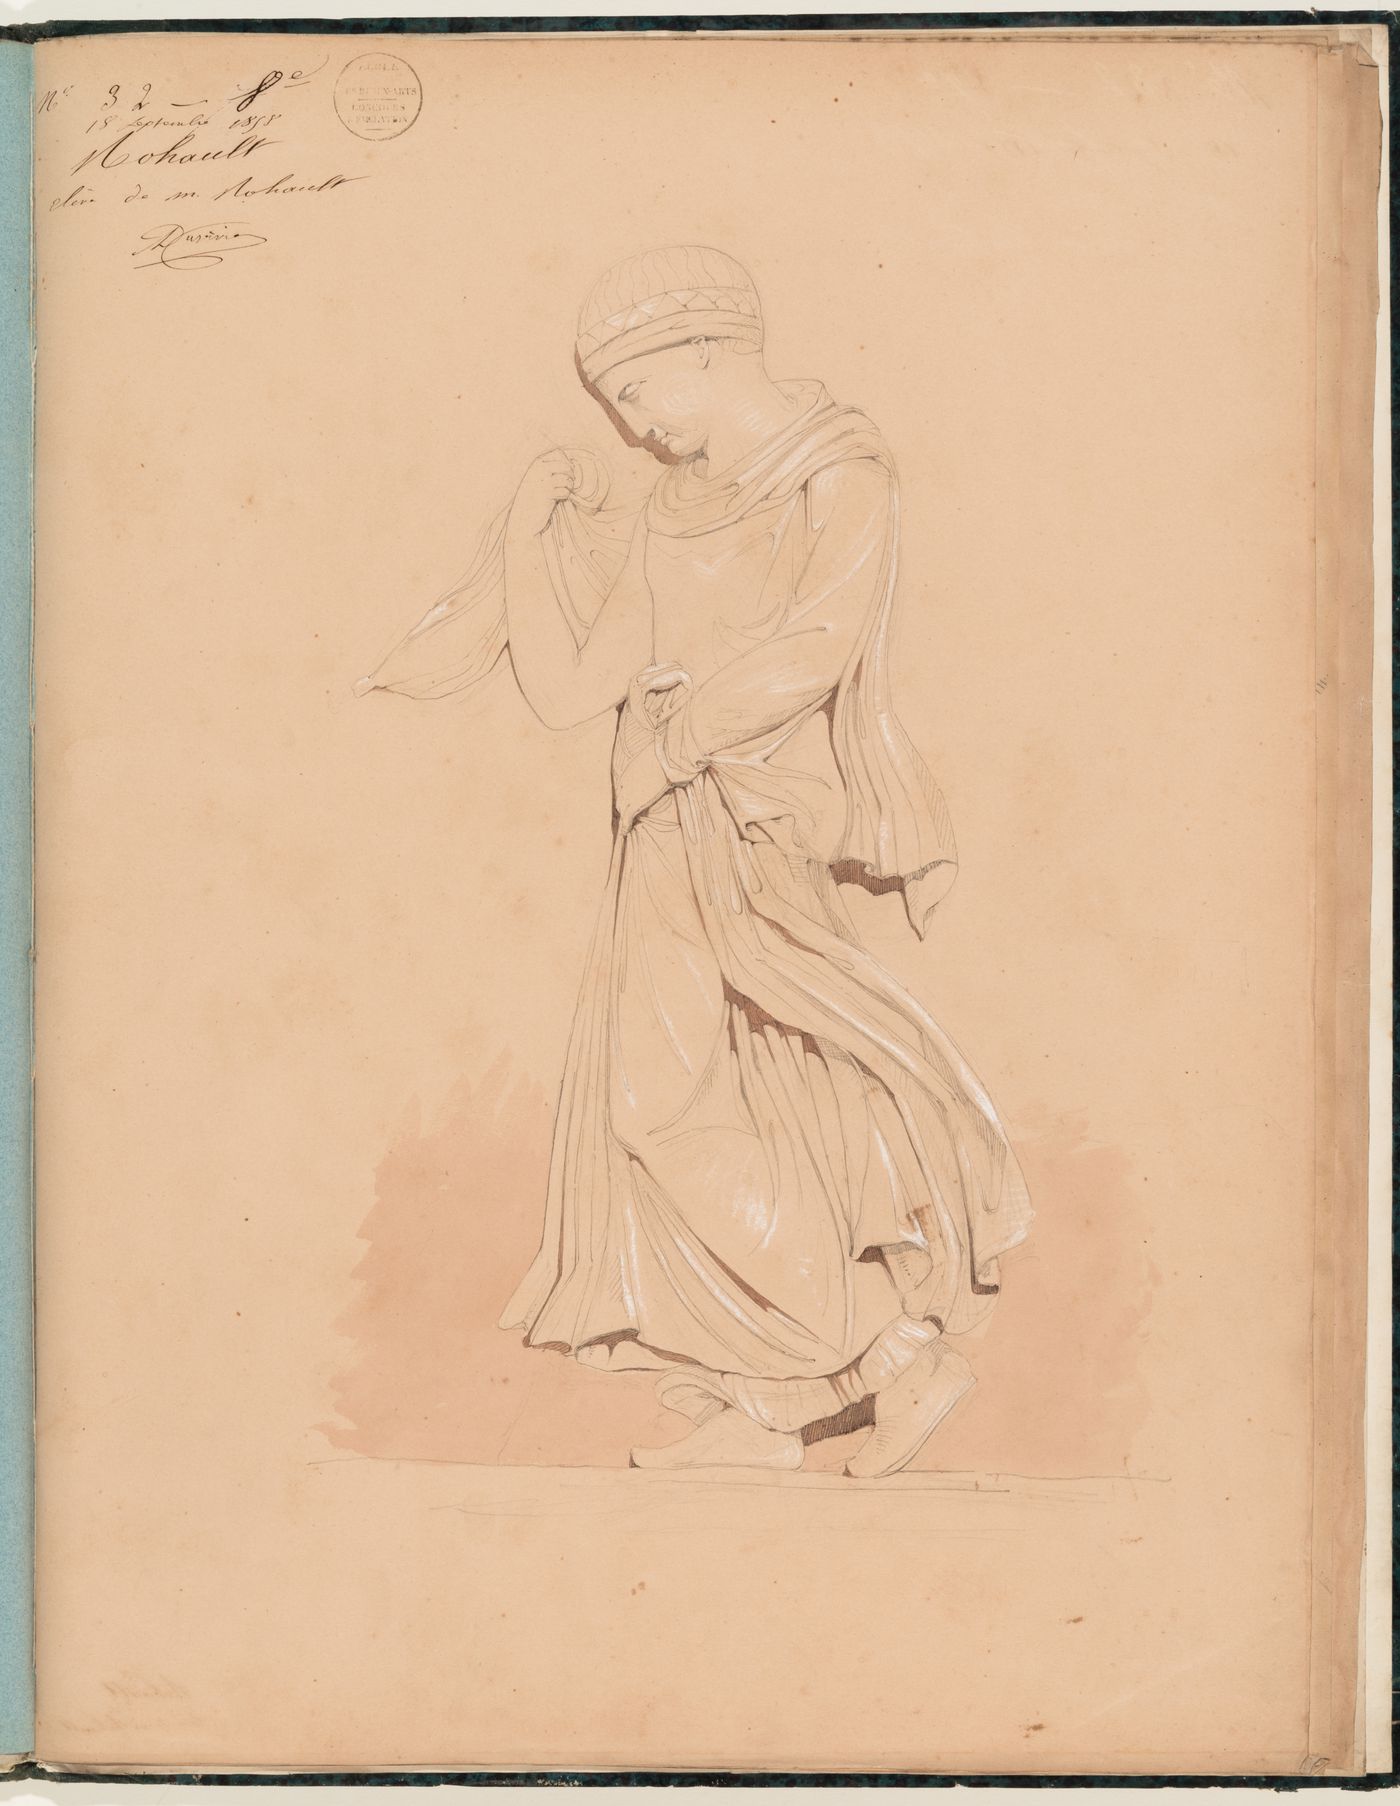 Concours d'émulation entry, 18 September 1858: Study of a female figure, possibly from a frieze or a metope